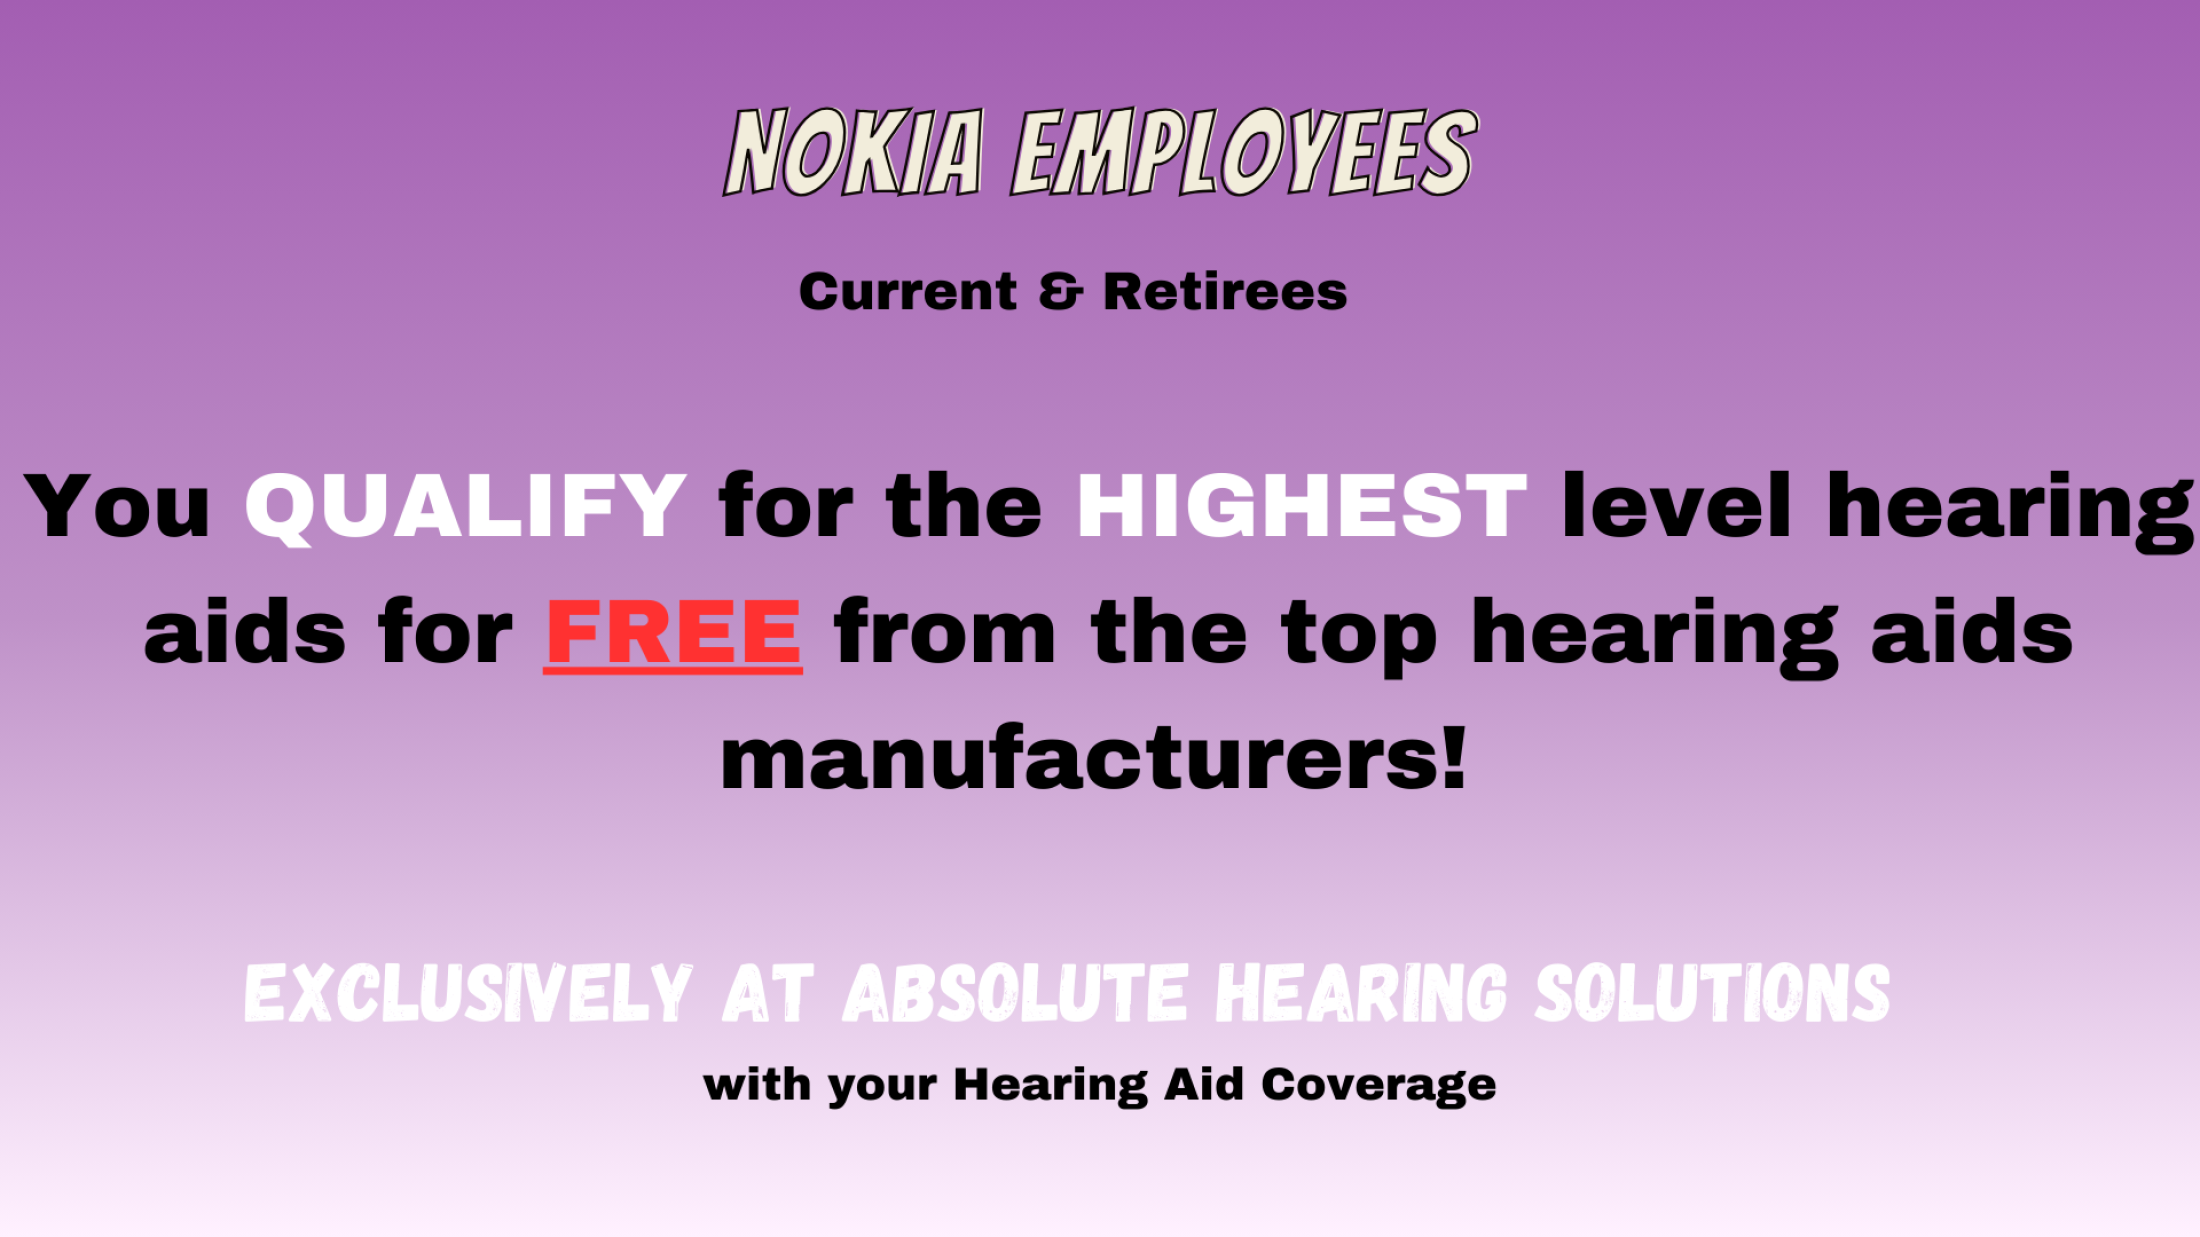 Nokia Employee Qualify For The Highest Level Hearing Aids For FREE From The Top Of The Line 